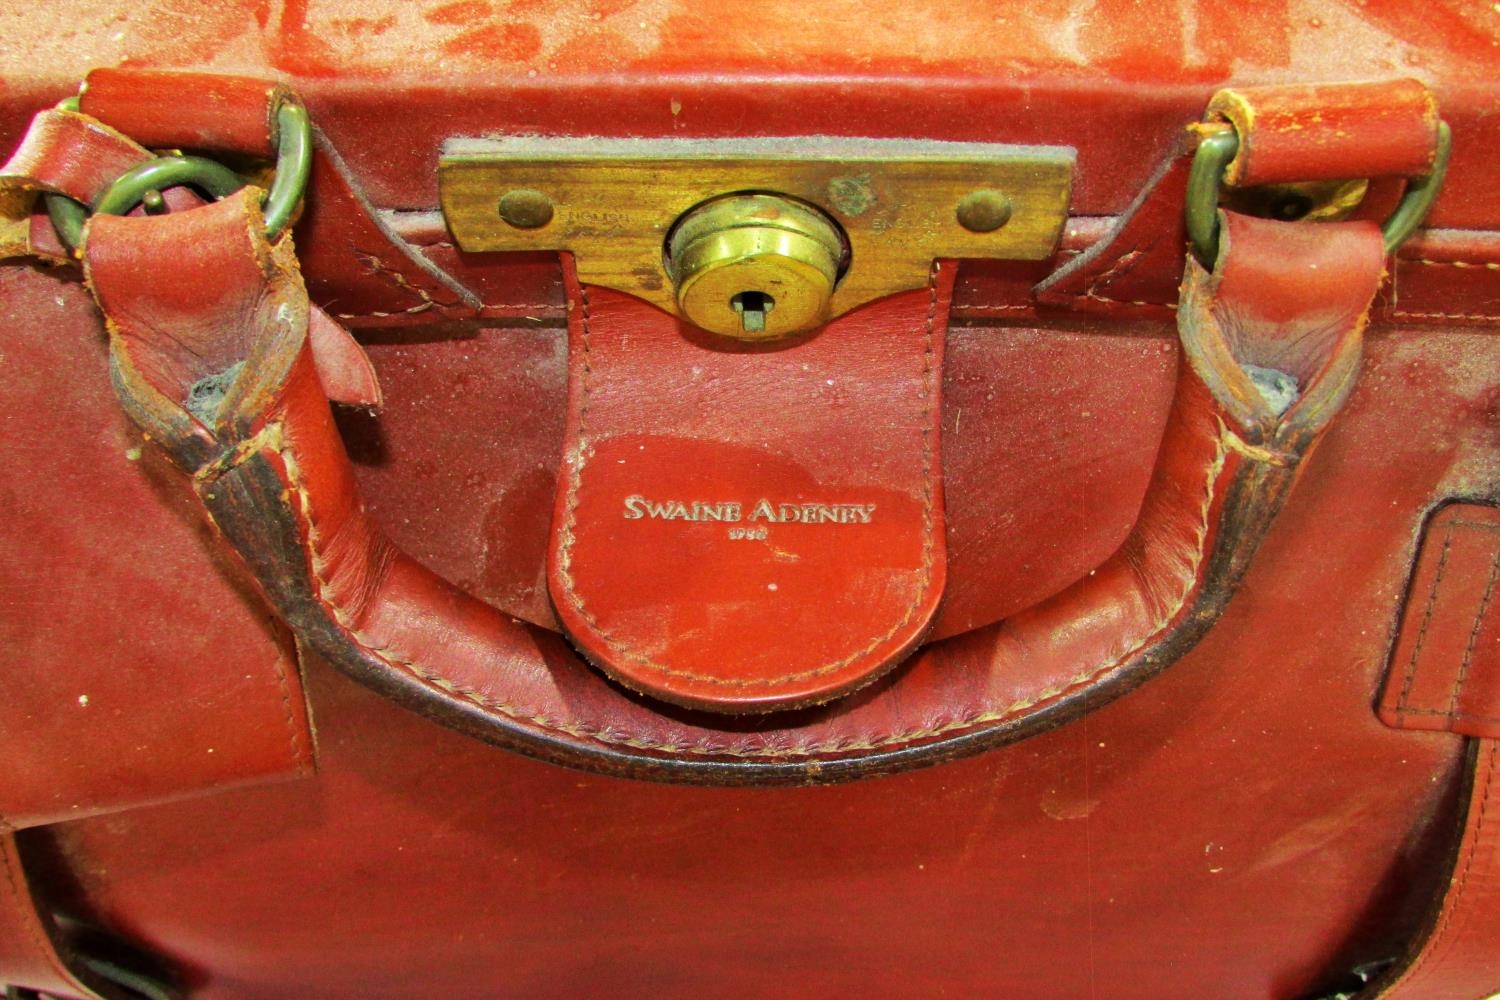 A Vintage Swain Adeney brown leather Gladstone bag, with decent stitching and fastenings - Image 3 of 3